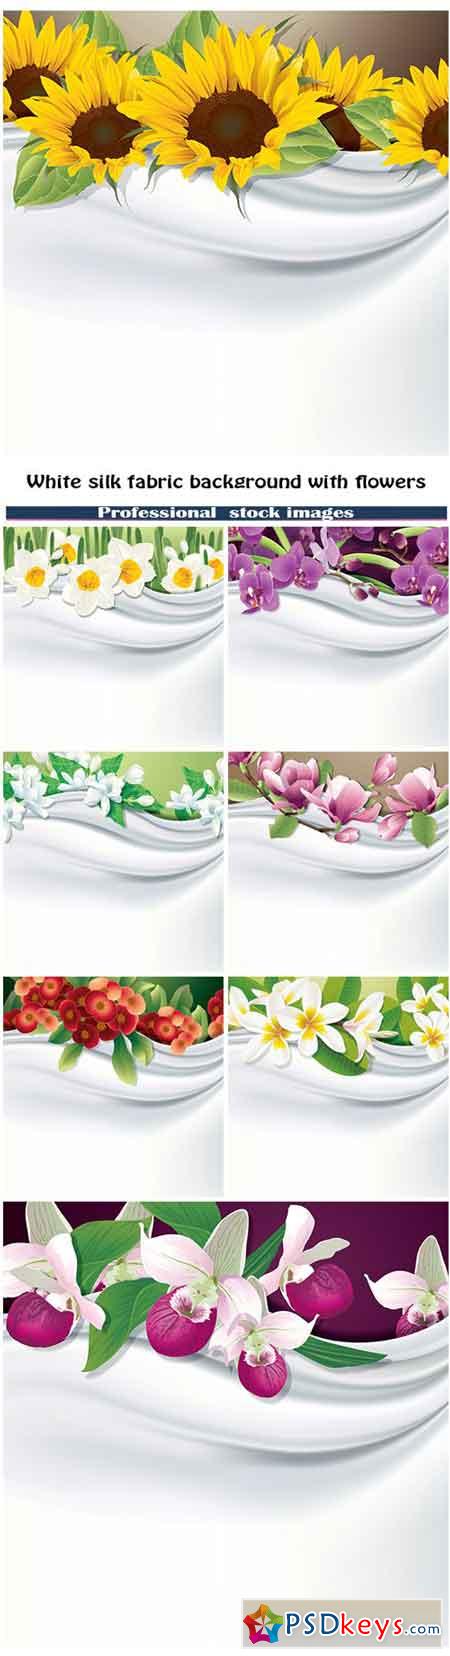 White silk fabric background with flowers